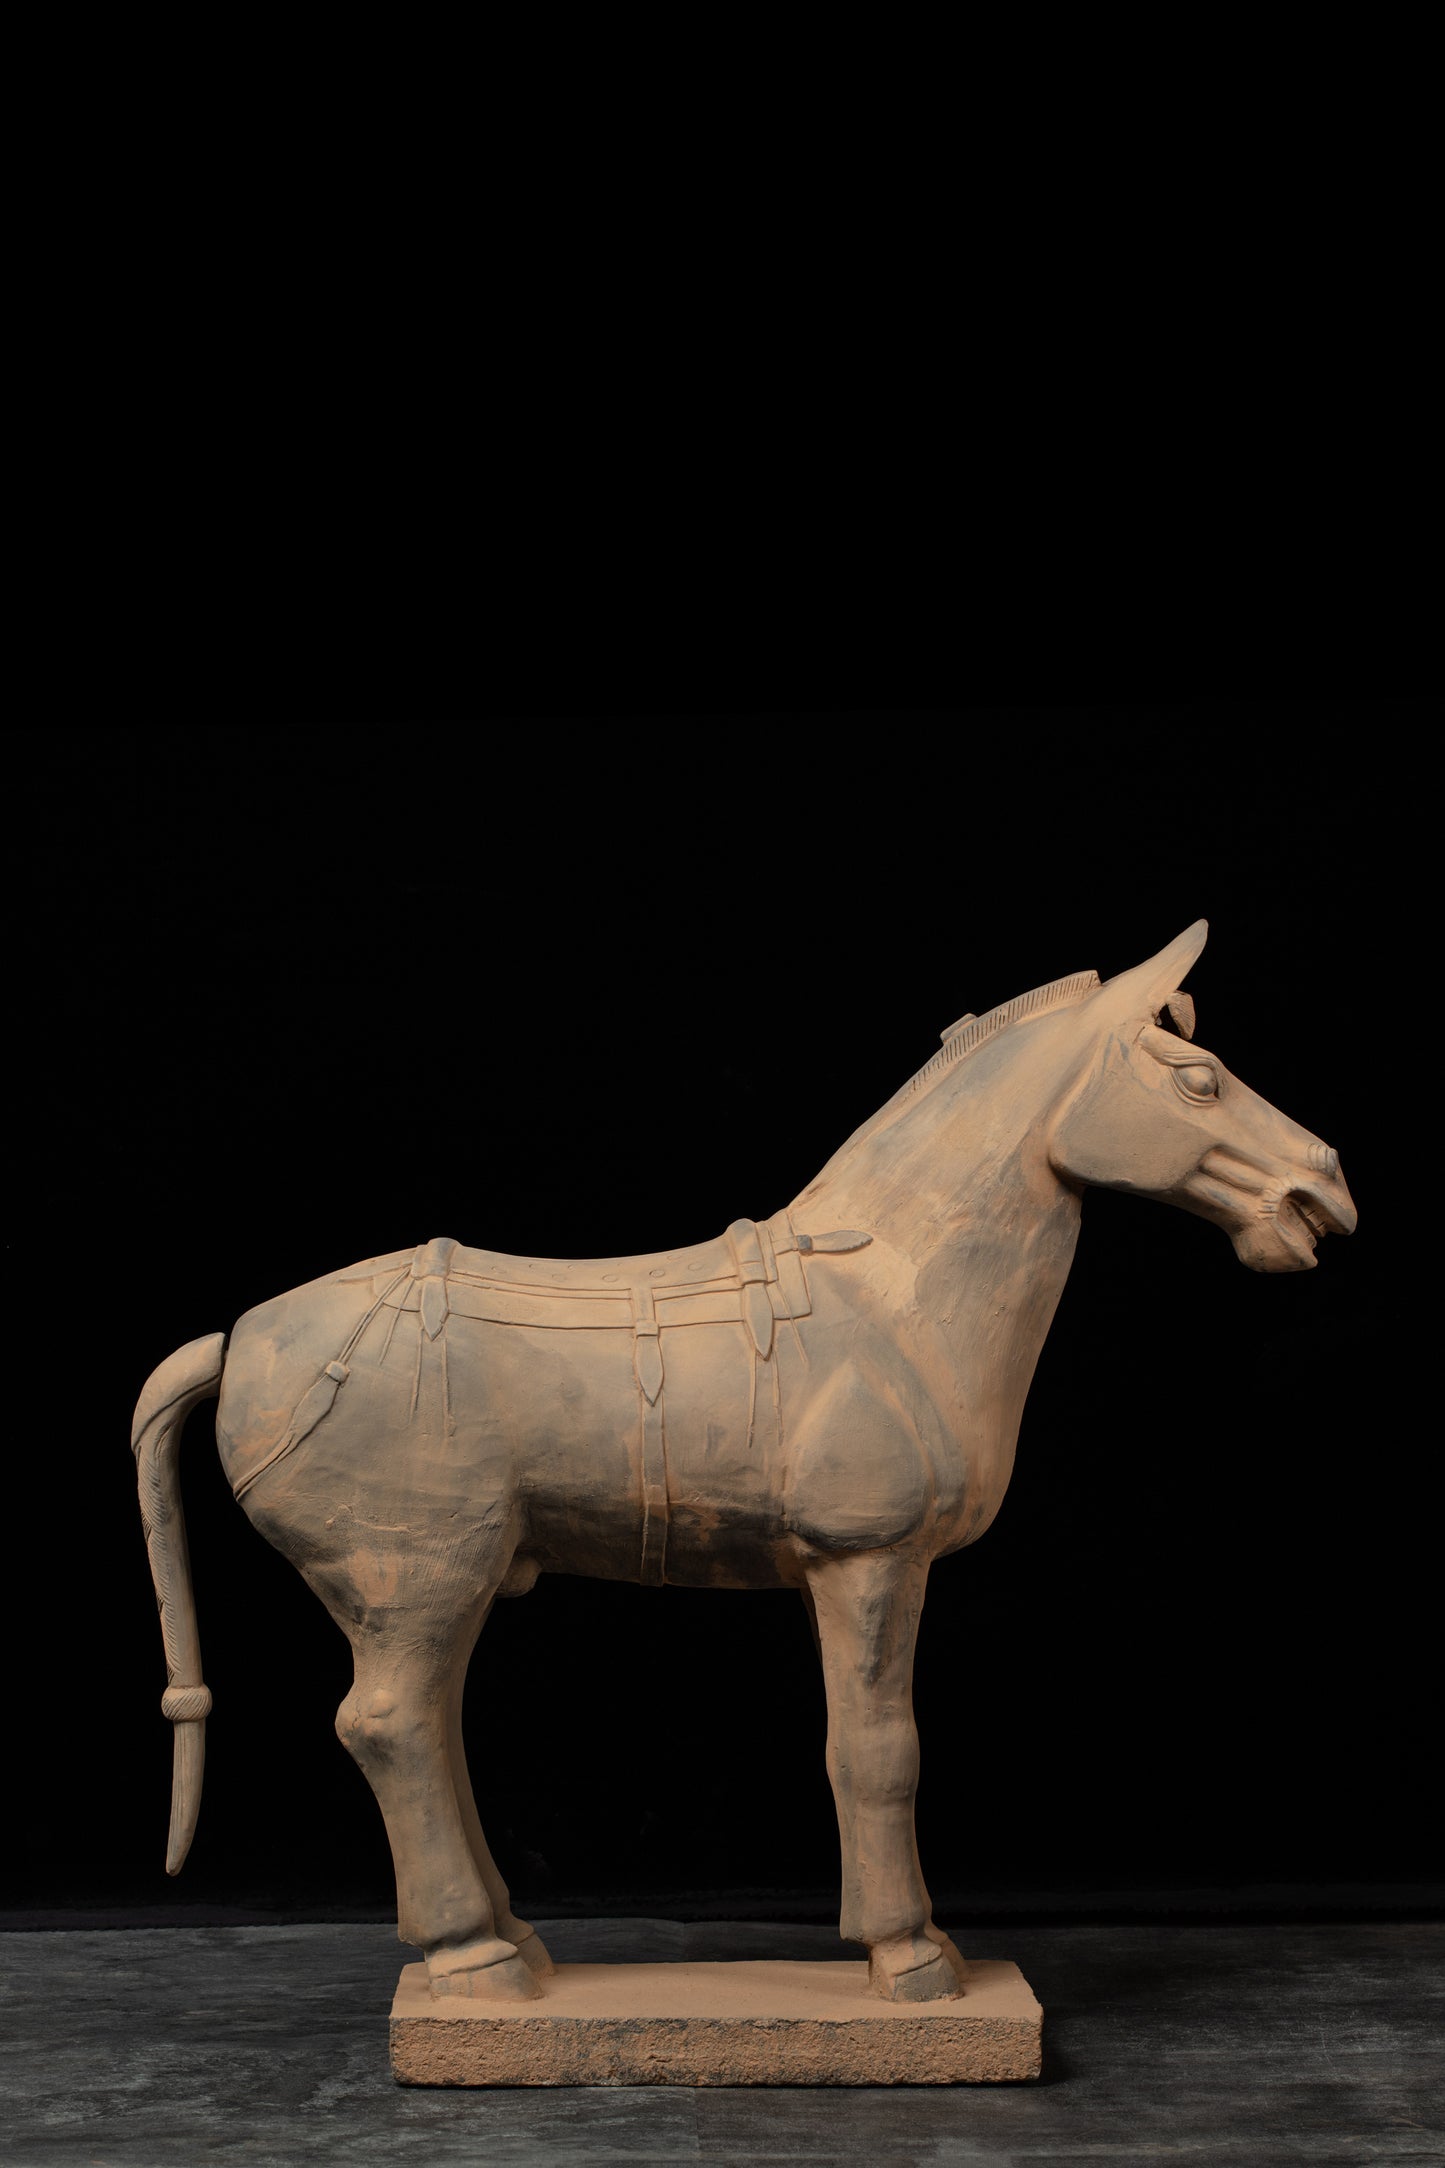 70CM Horse - CLAYARMY -Profile shot emphasizing the majestic posture and intricate features of our 70CM Clayarmy Terracotta Horse.